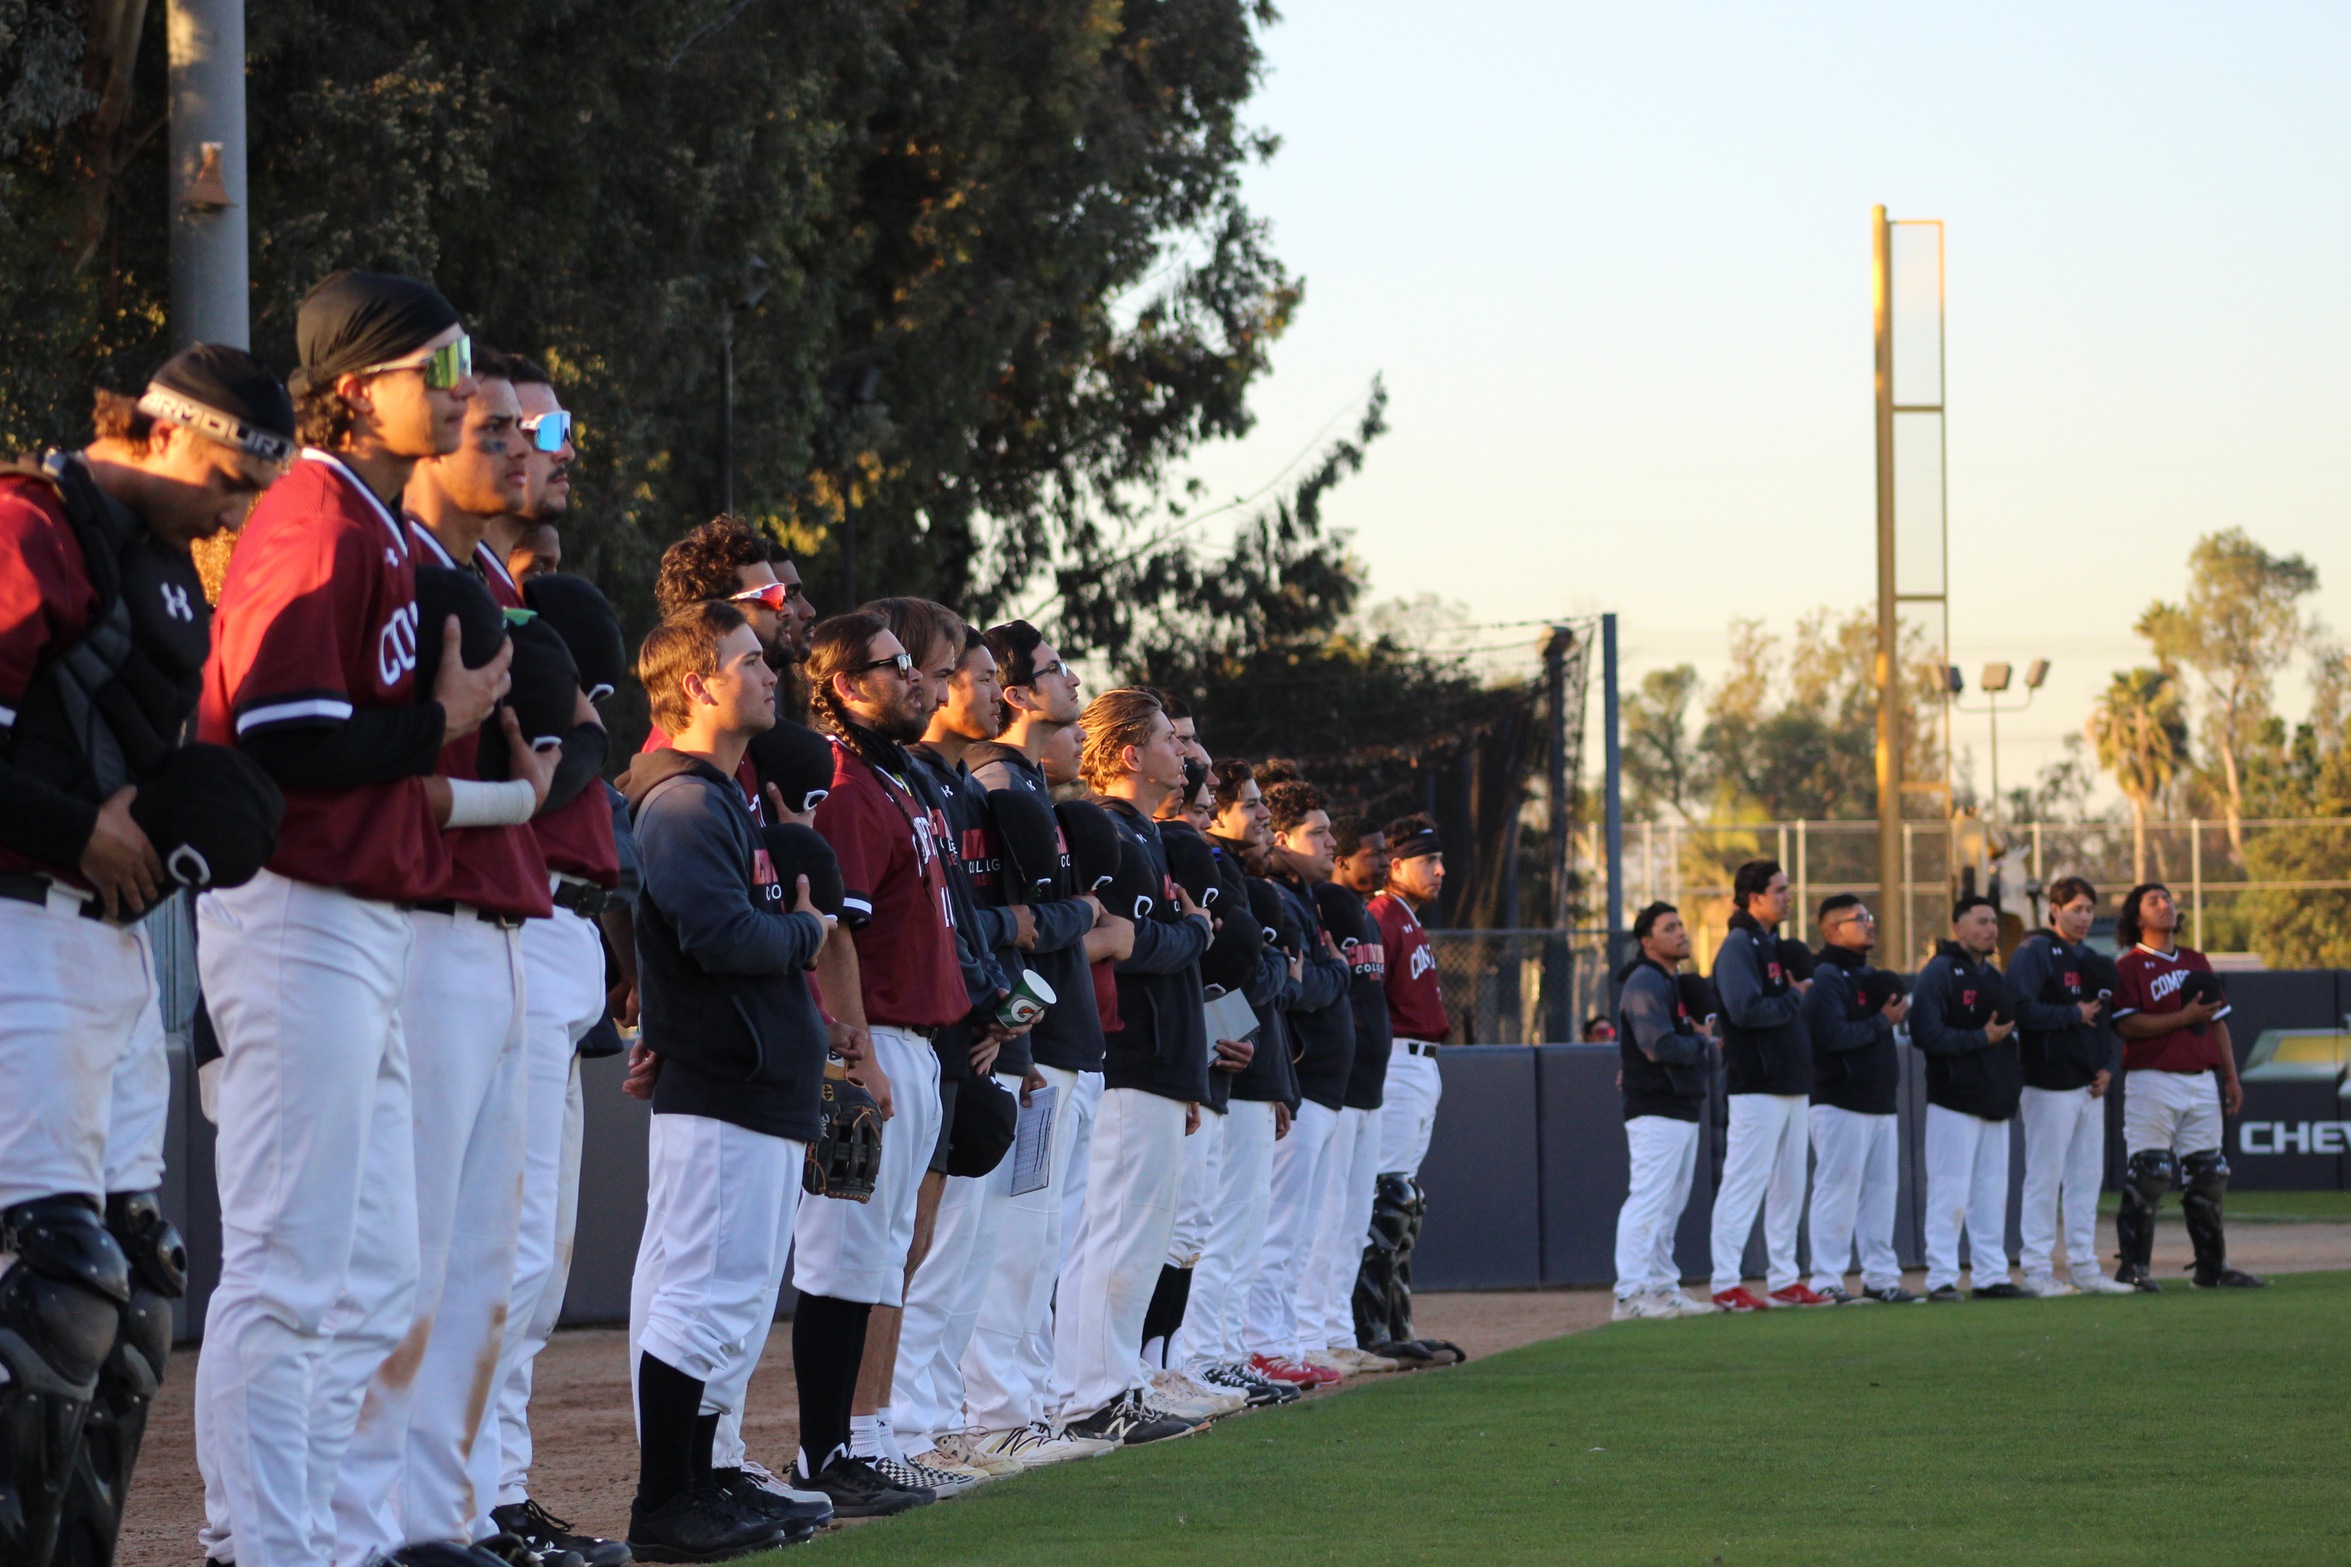 The Compton College Tartars baseball team host hot Griffins to a 10-3 loss.   